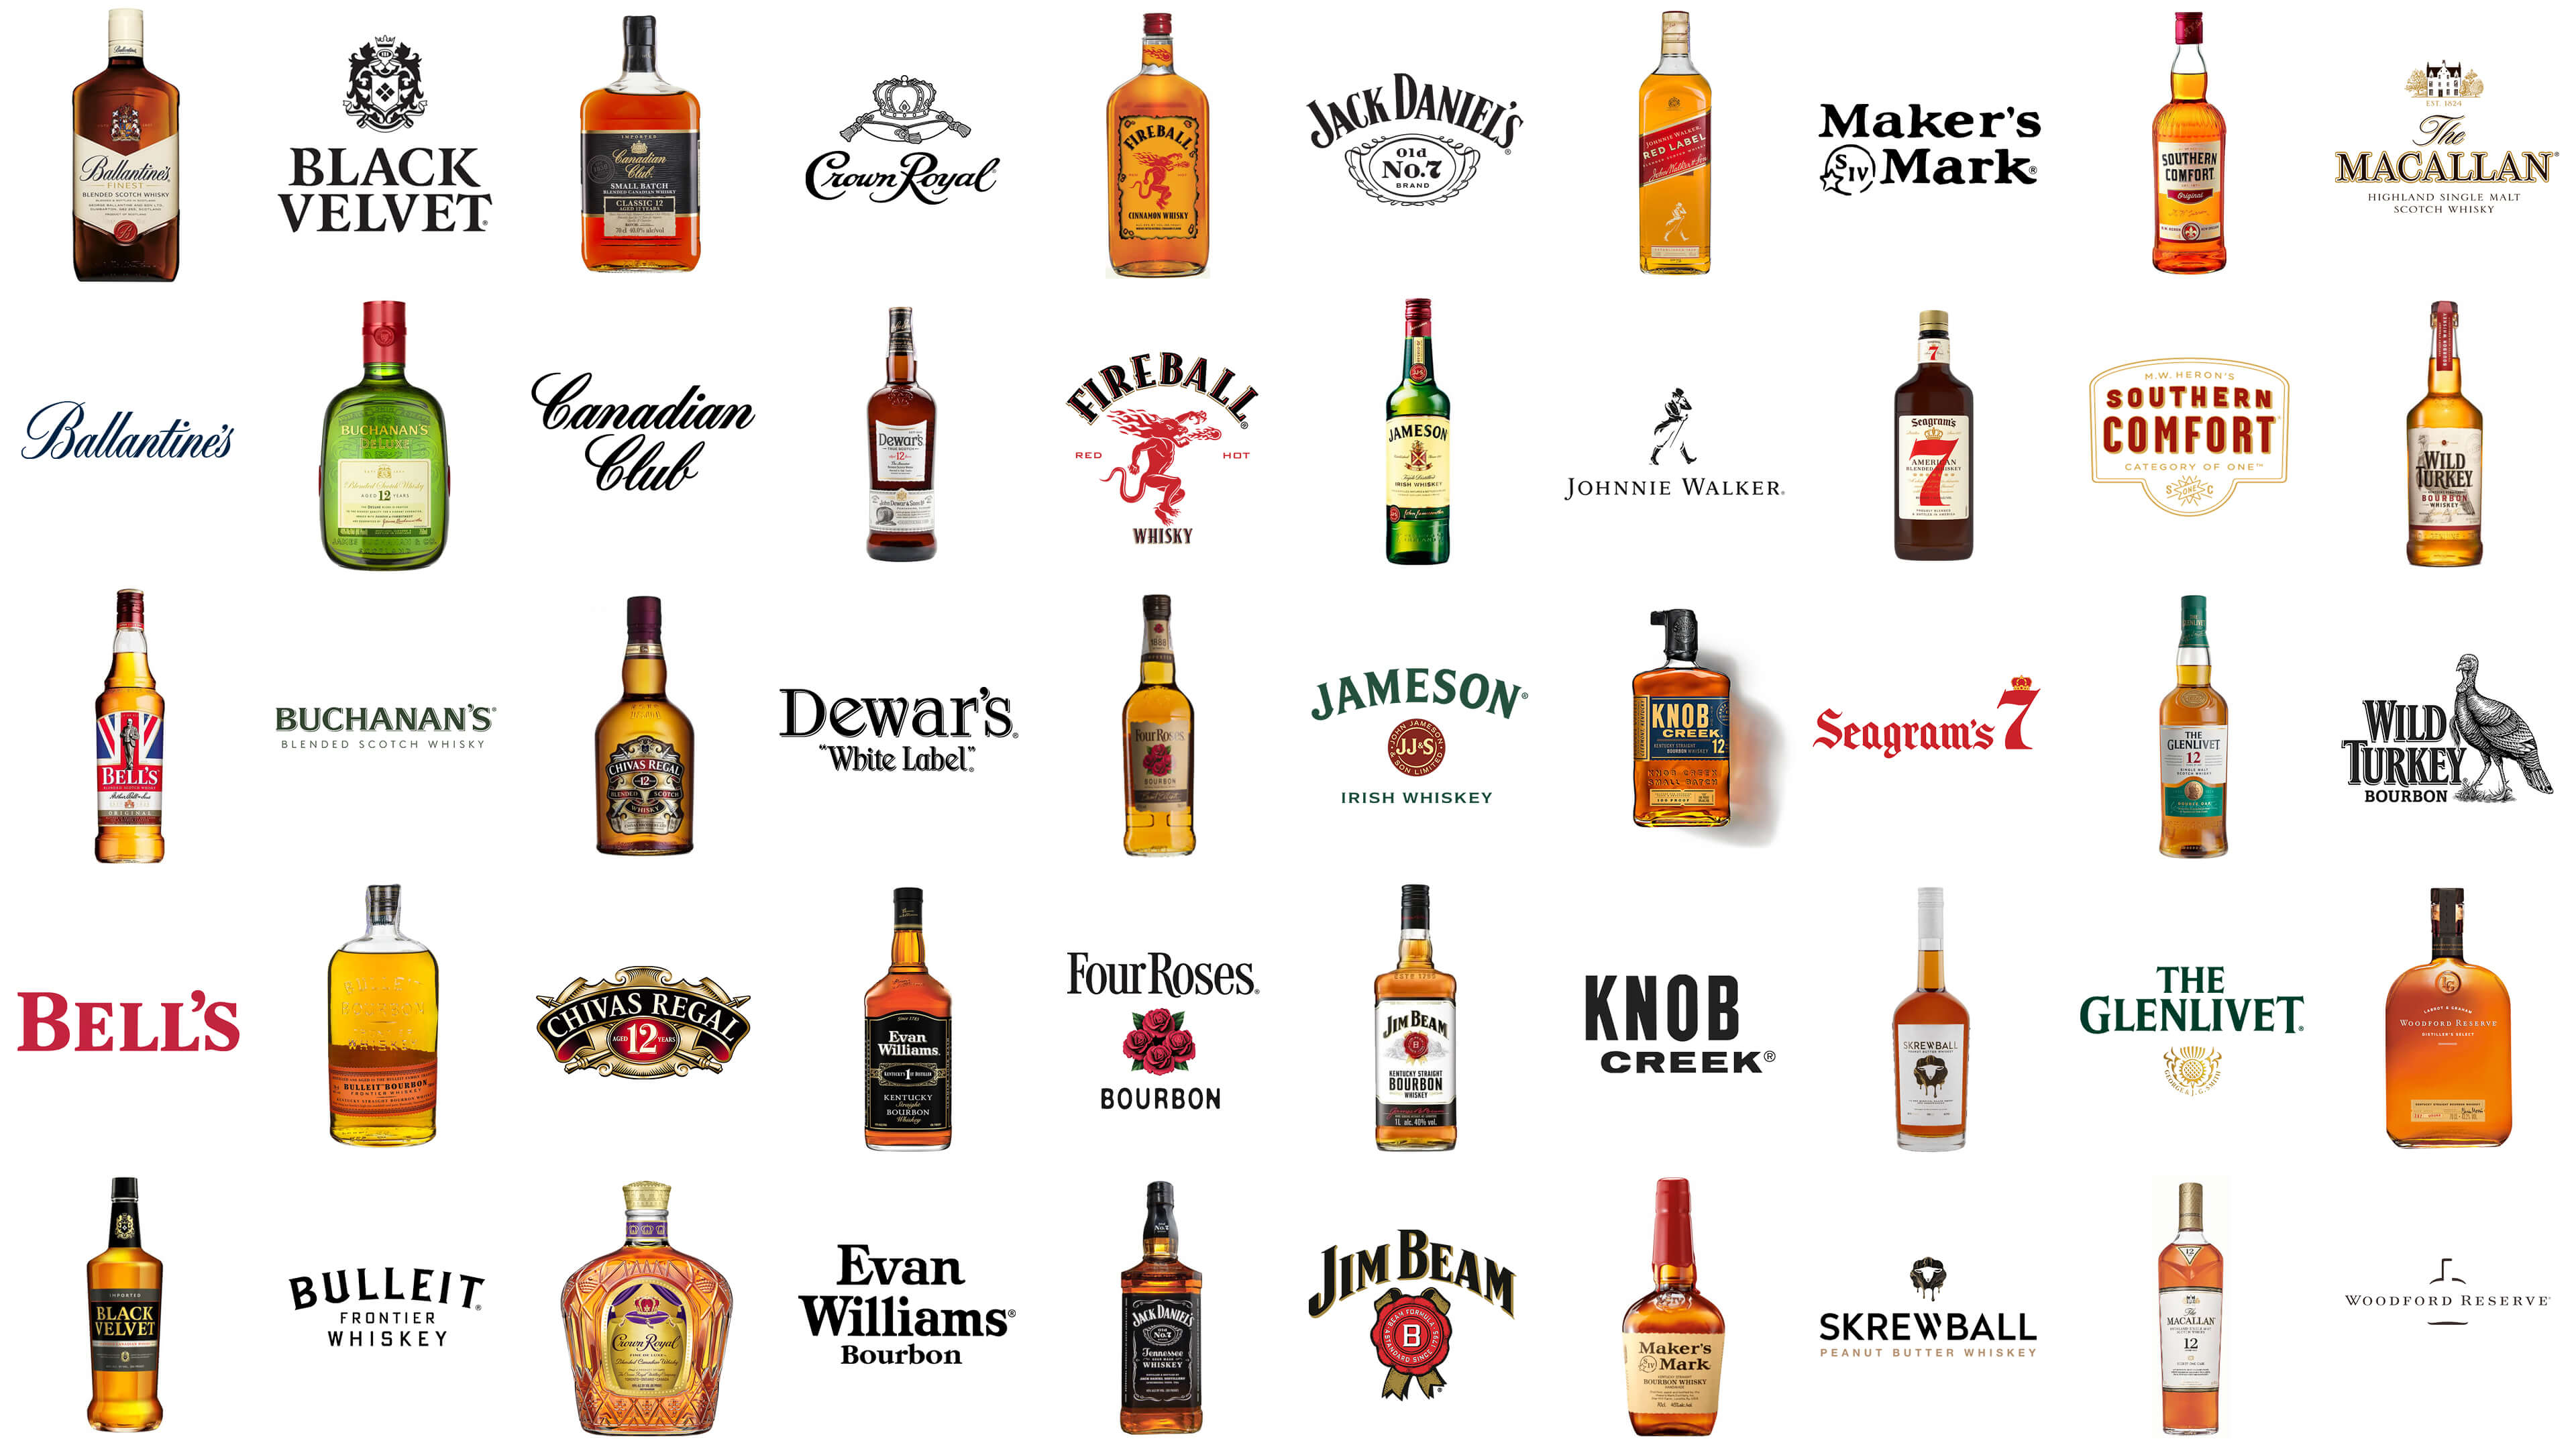 THE BEST SELLING WHISKEY BRANDS IN THE USA 